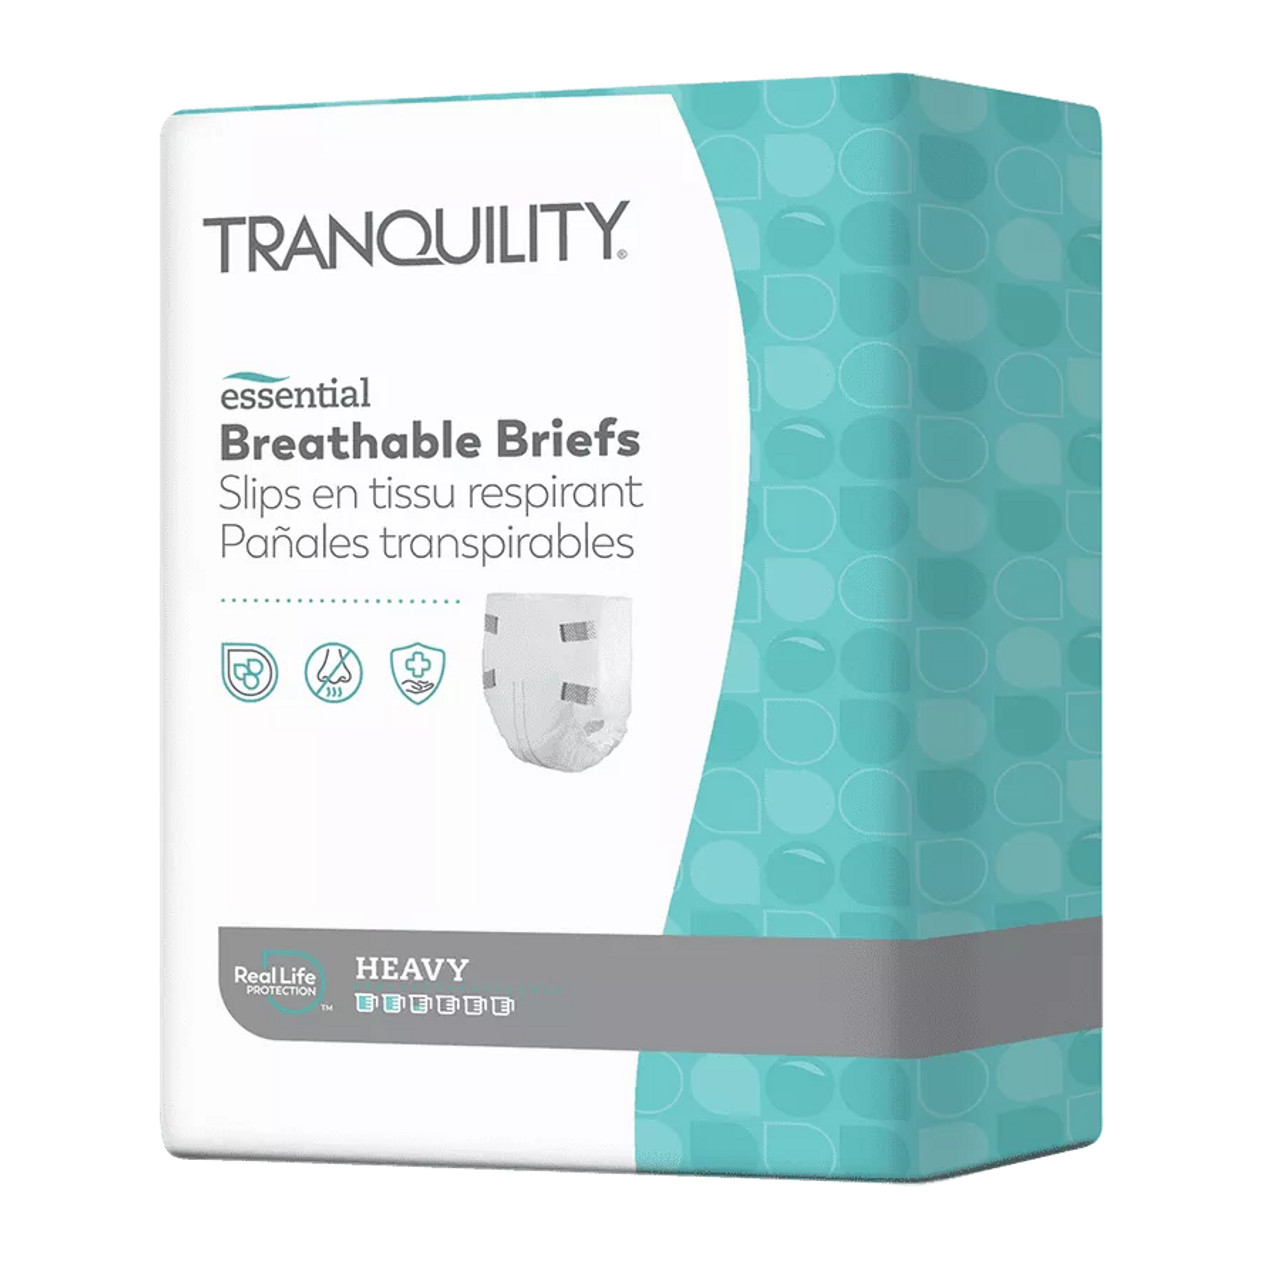 Tranquility 2744 Essential Breathable Briefs  Small, 10x10s